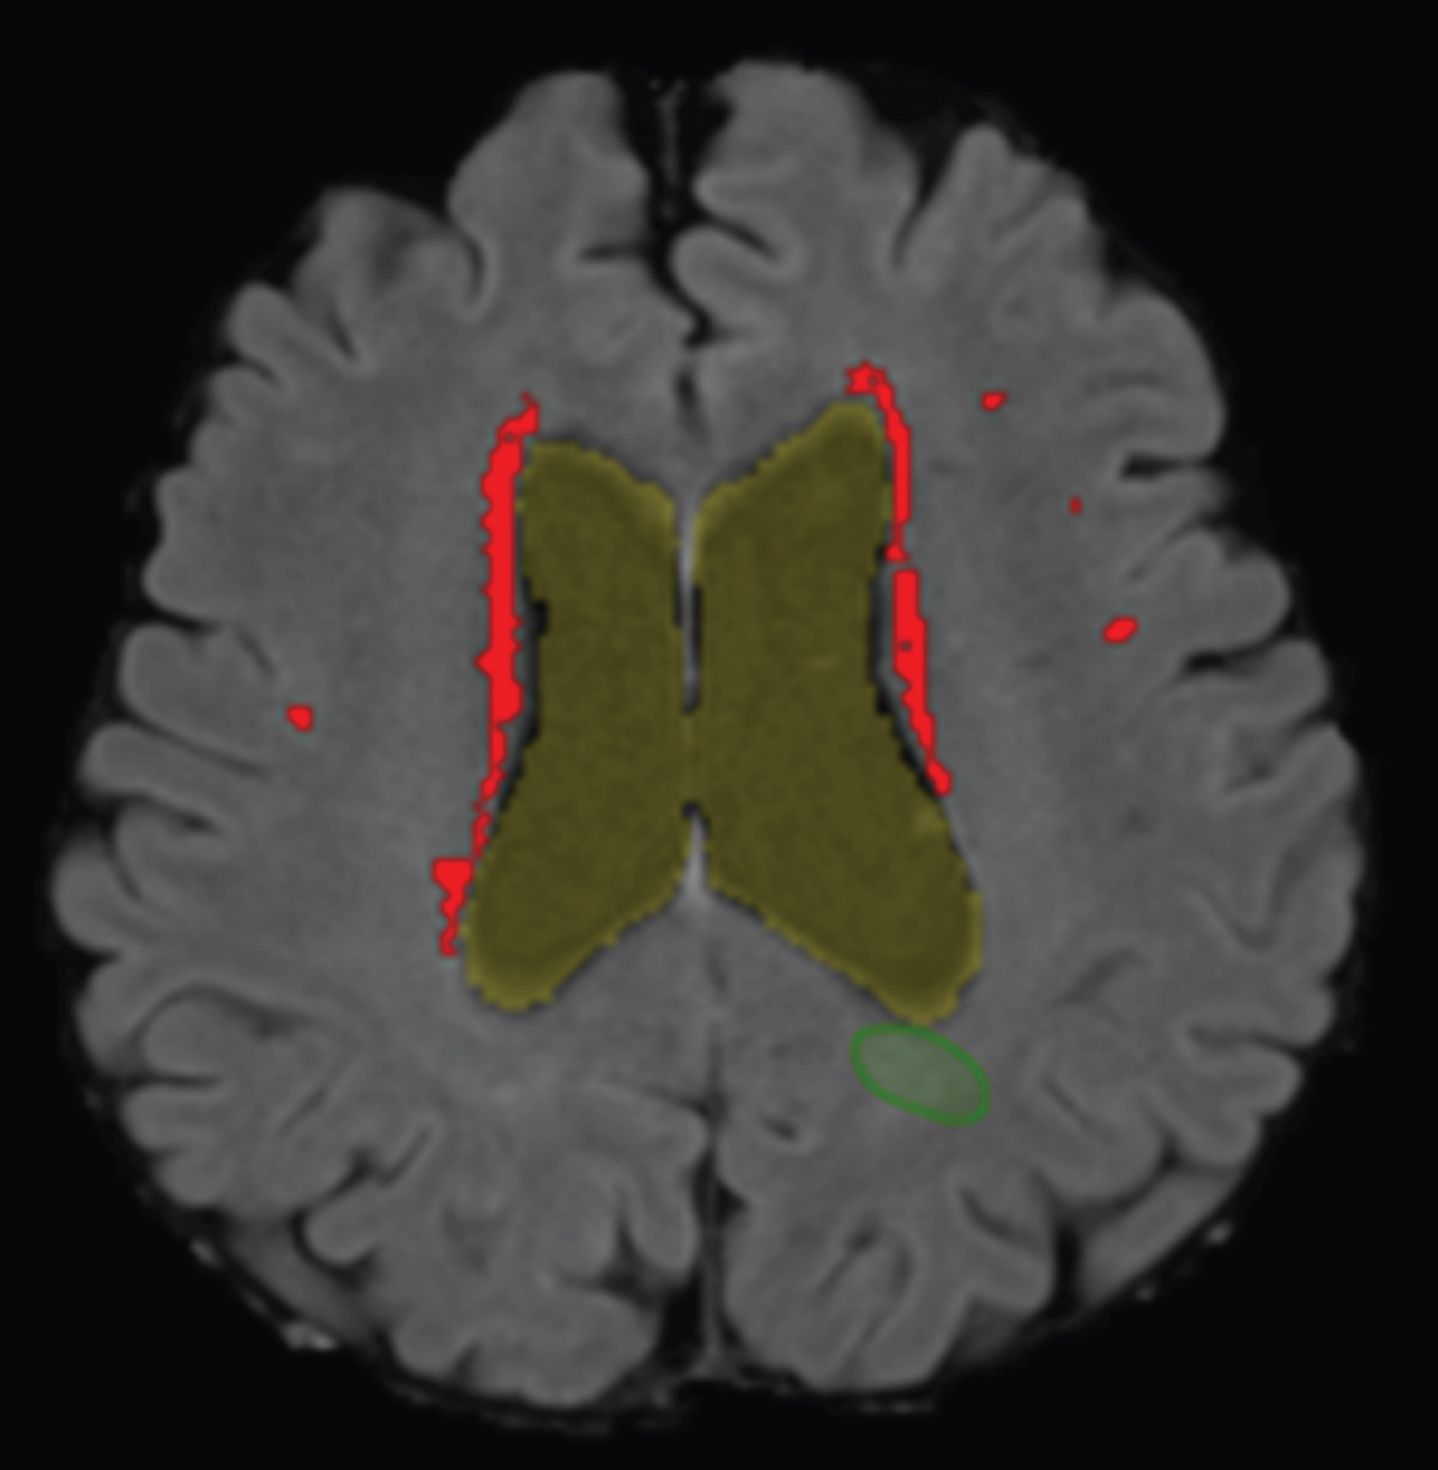 WMH detection on a structural MRI scan. Segmentation of the WMHs detected by the computer aided detection system in the transverse plane projected on a T1-weighted MRI scan of an AD patient. Periventricular WMHs are indicated in red/light gray. Of note, the 
(green) circumference, right under ventricle, indicates a false positive WMH and was removed during post-processing.